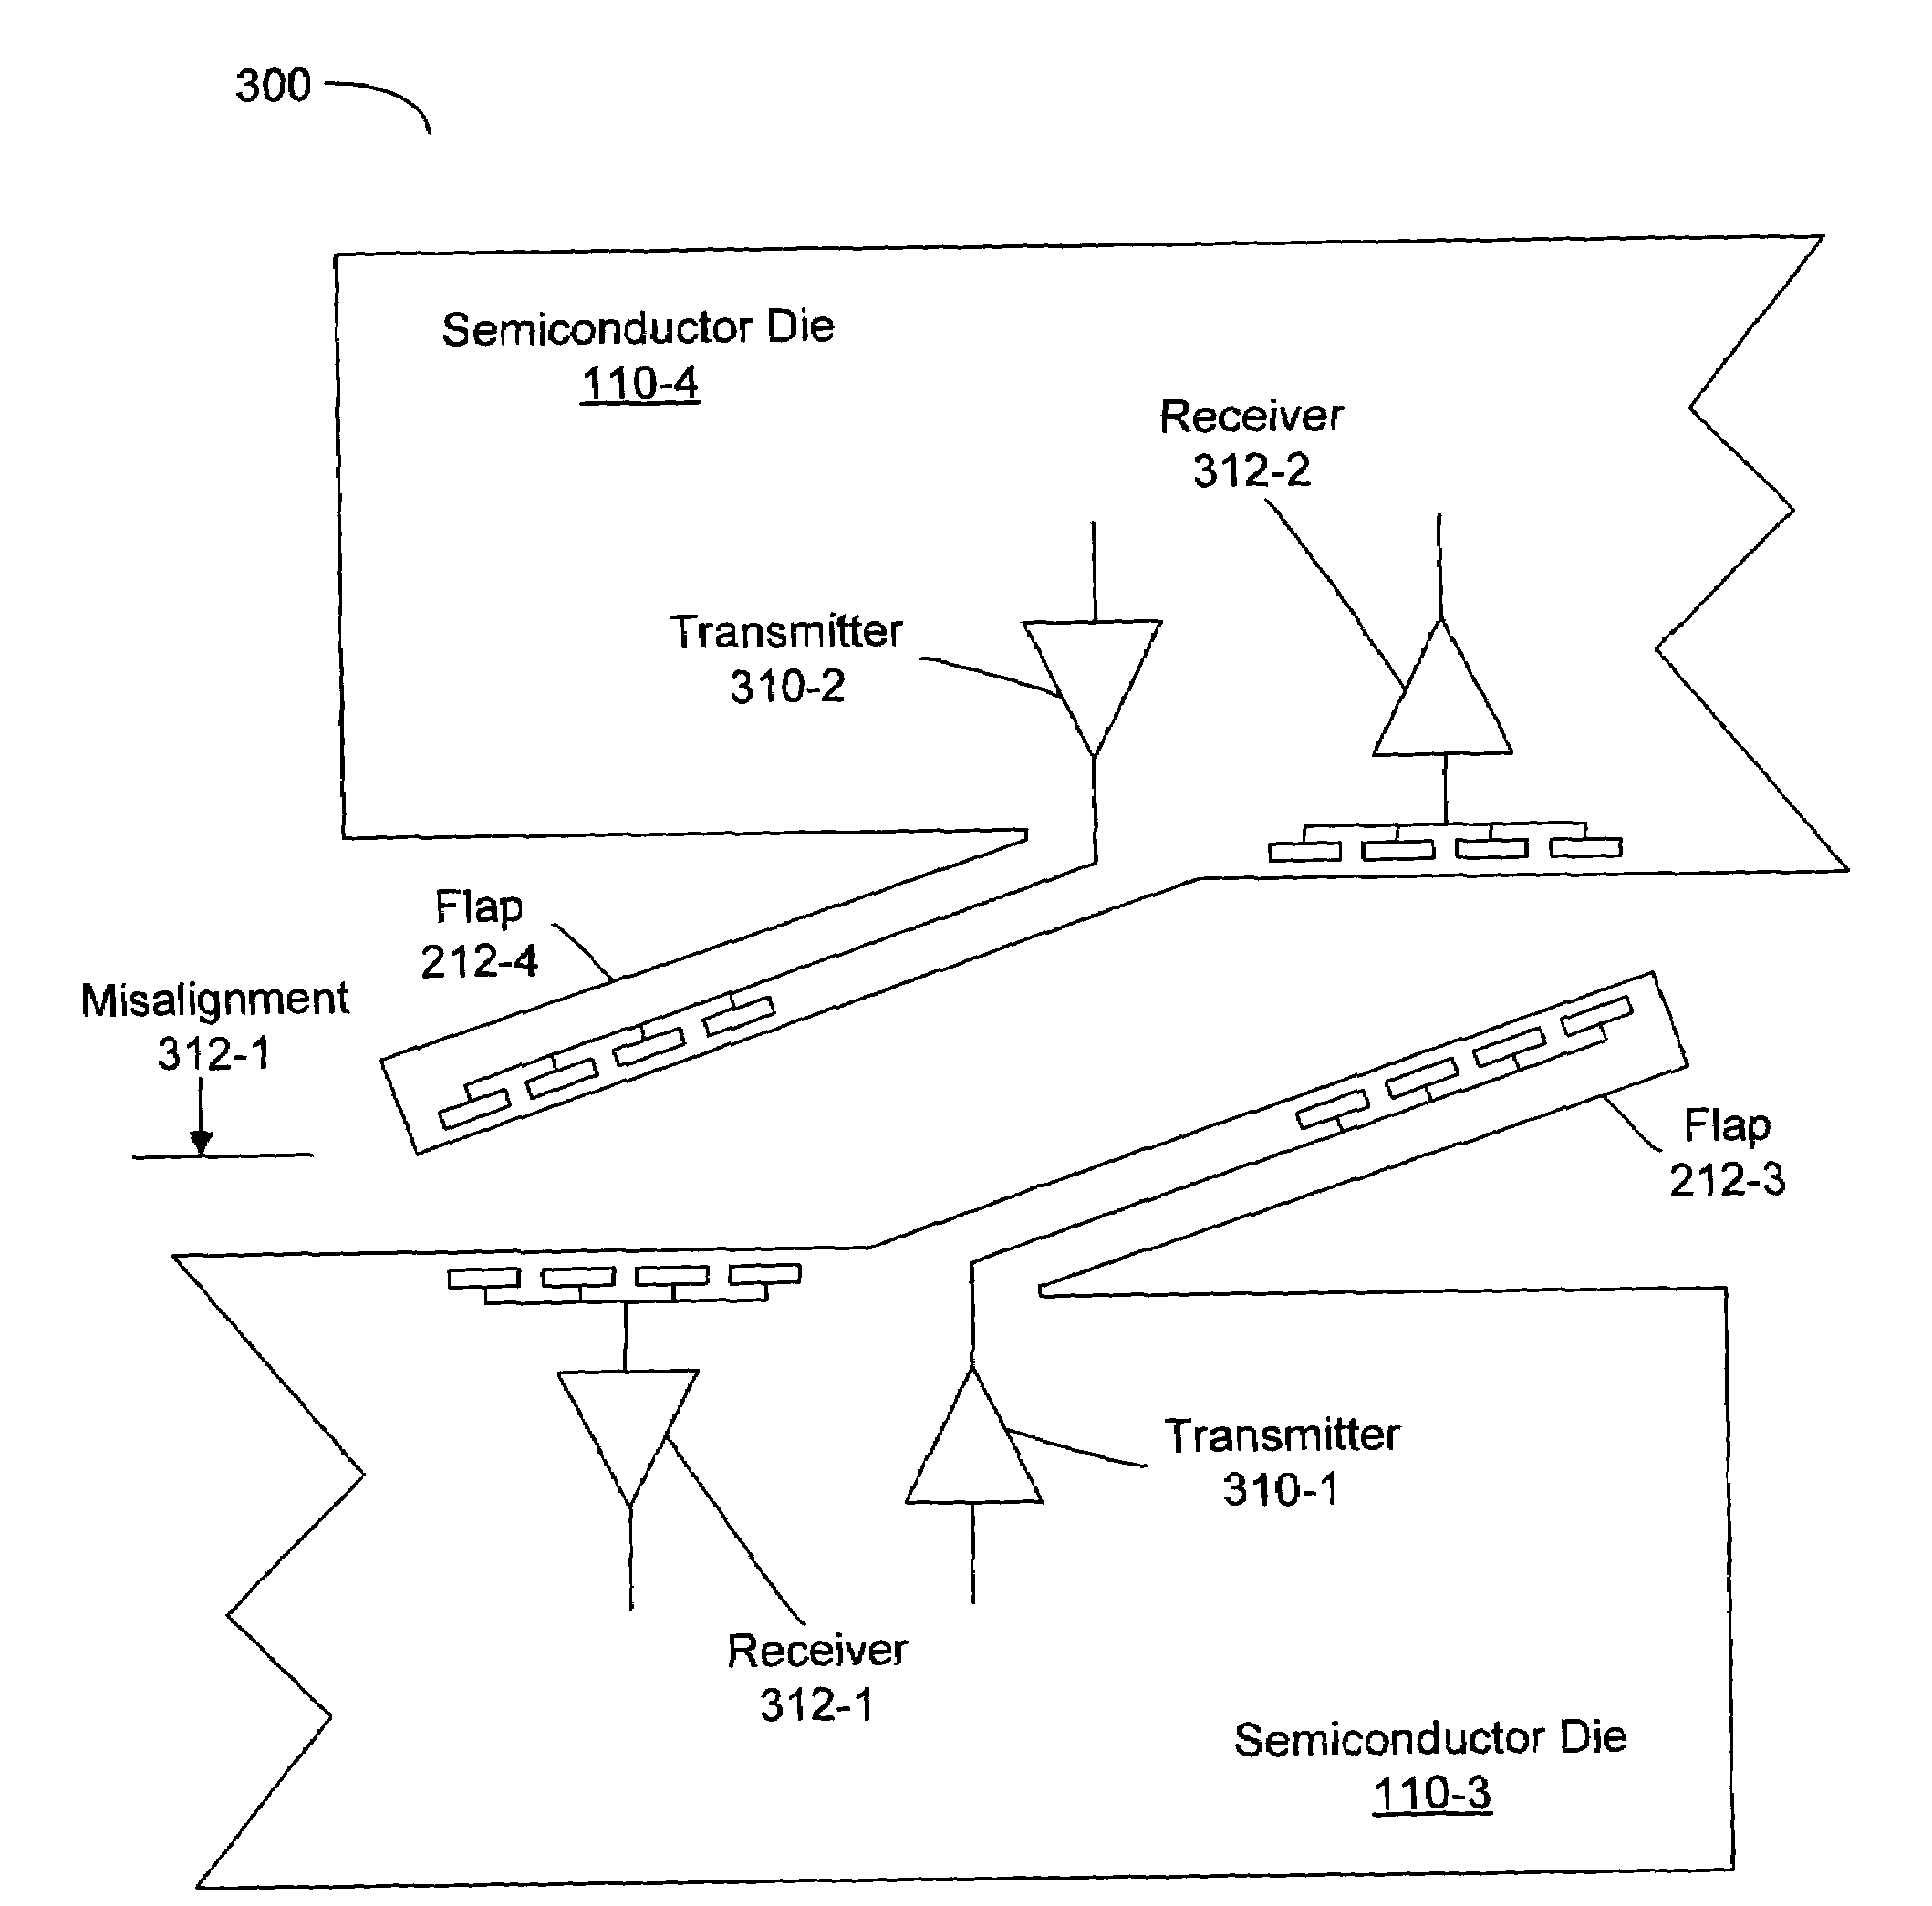 Structures for Z-aligned proximity communication